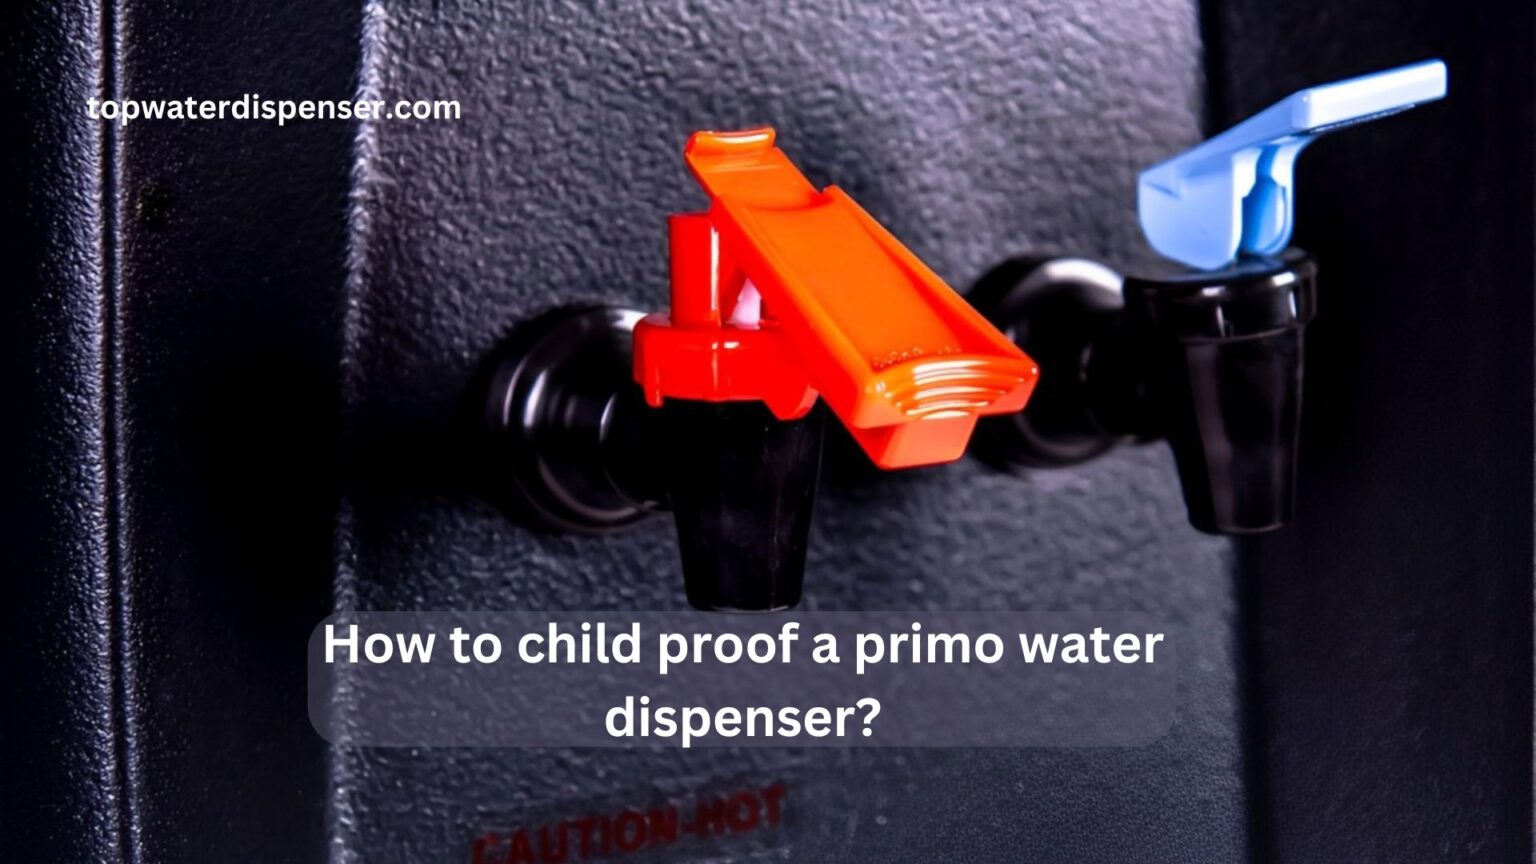 How to child proof a primo water dispenser?